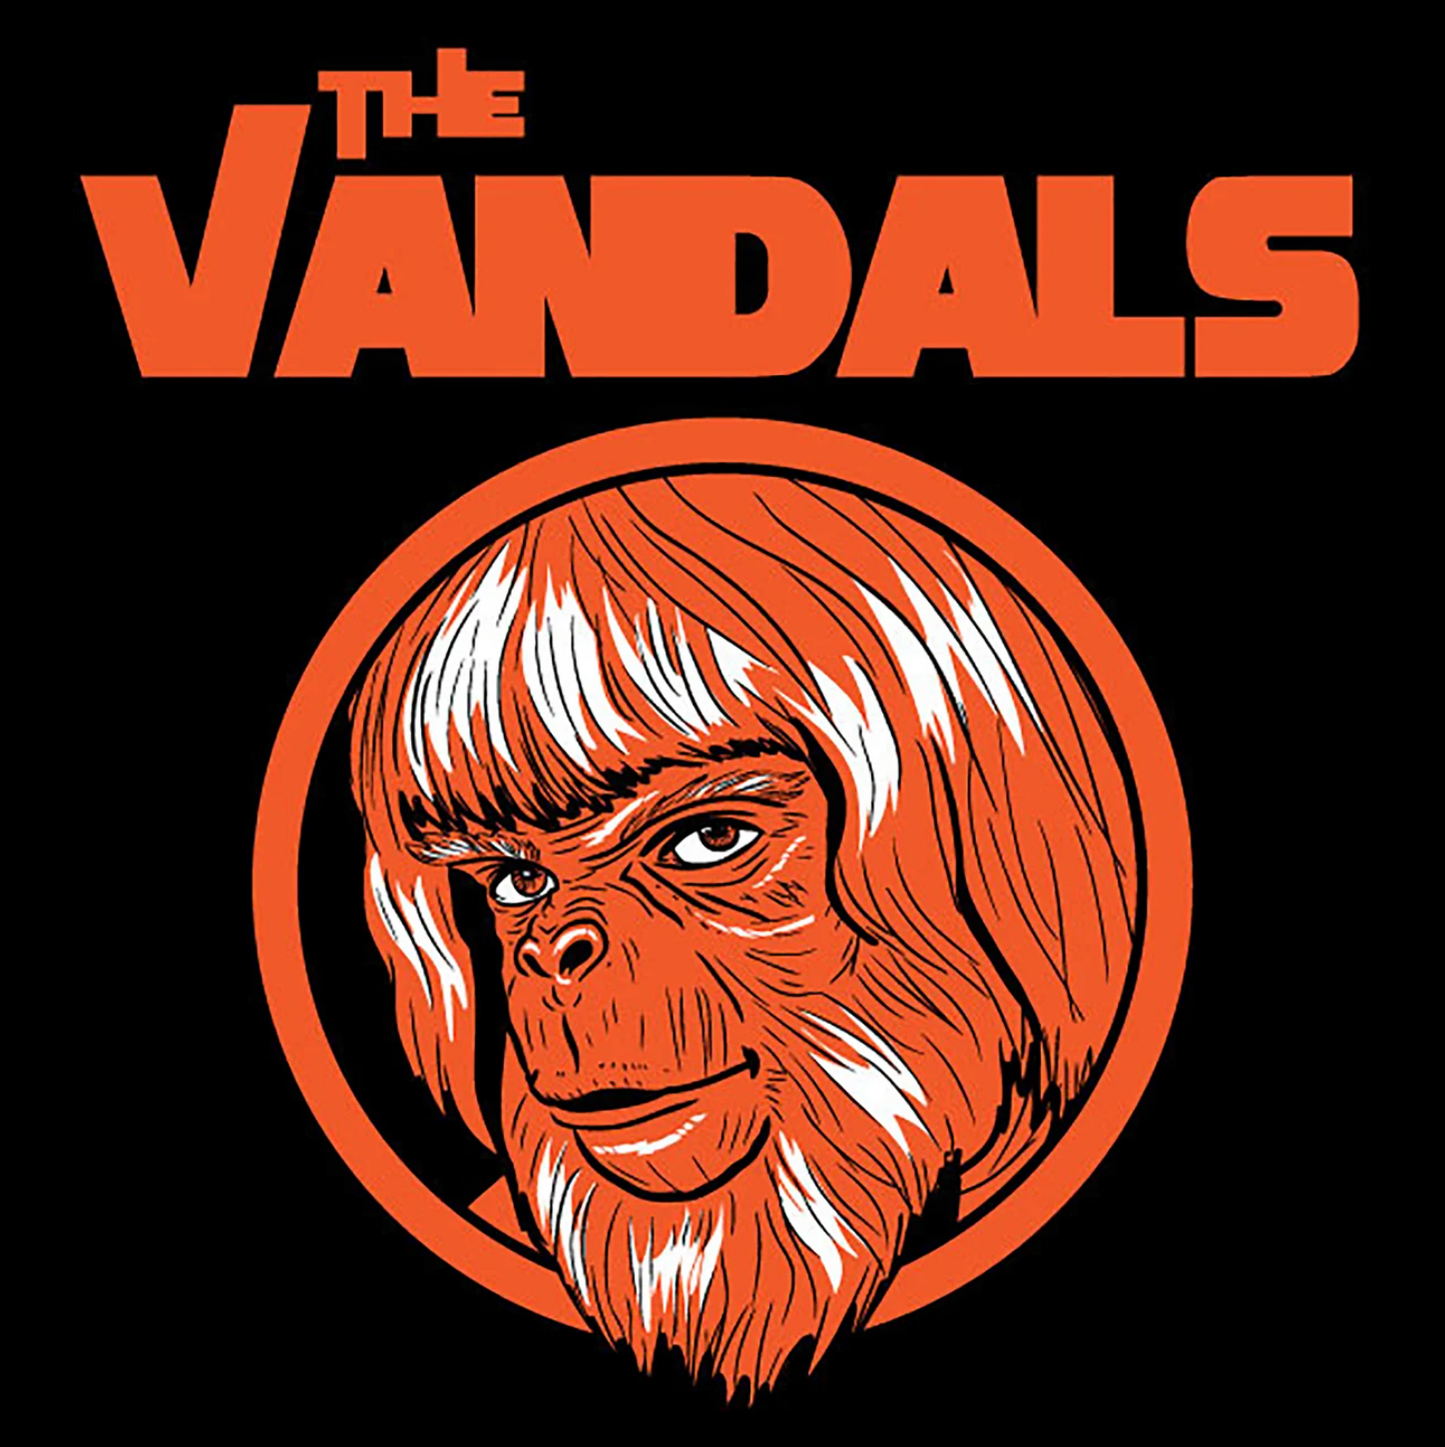 The Vandals: The Paul Williams Tee